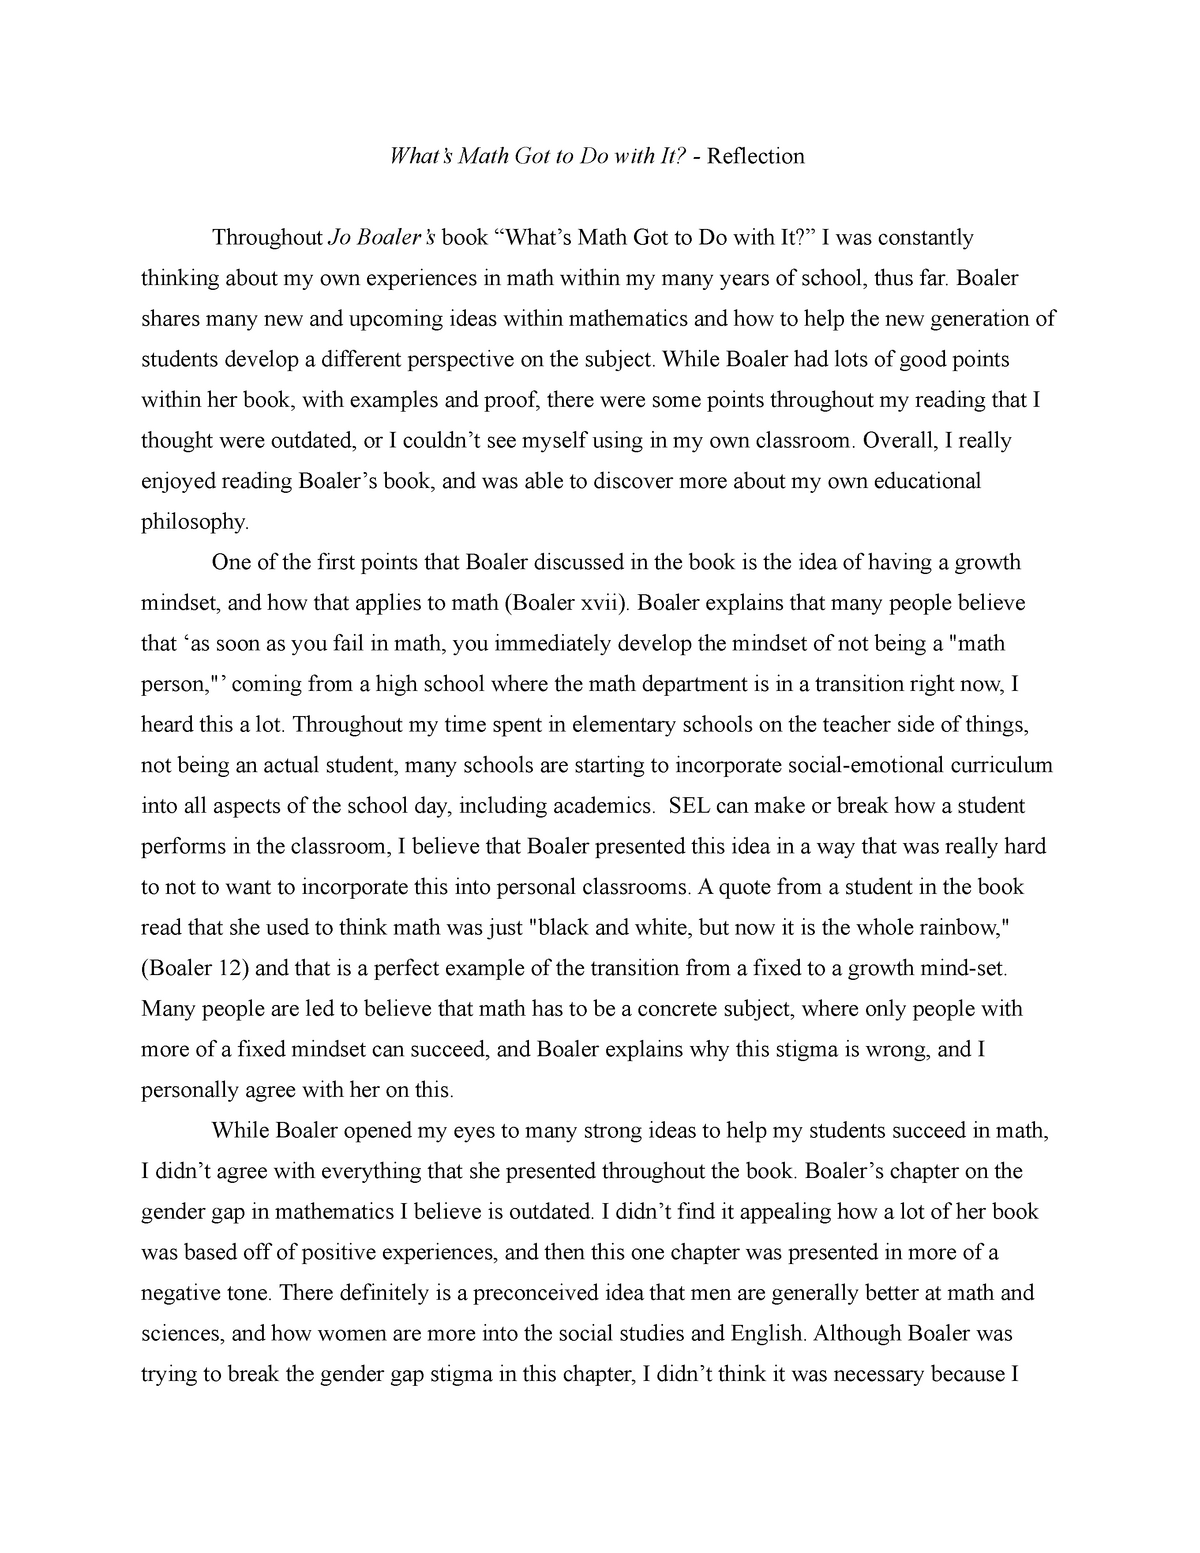 essay about what you have learned in math